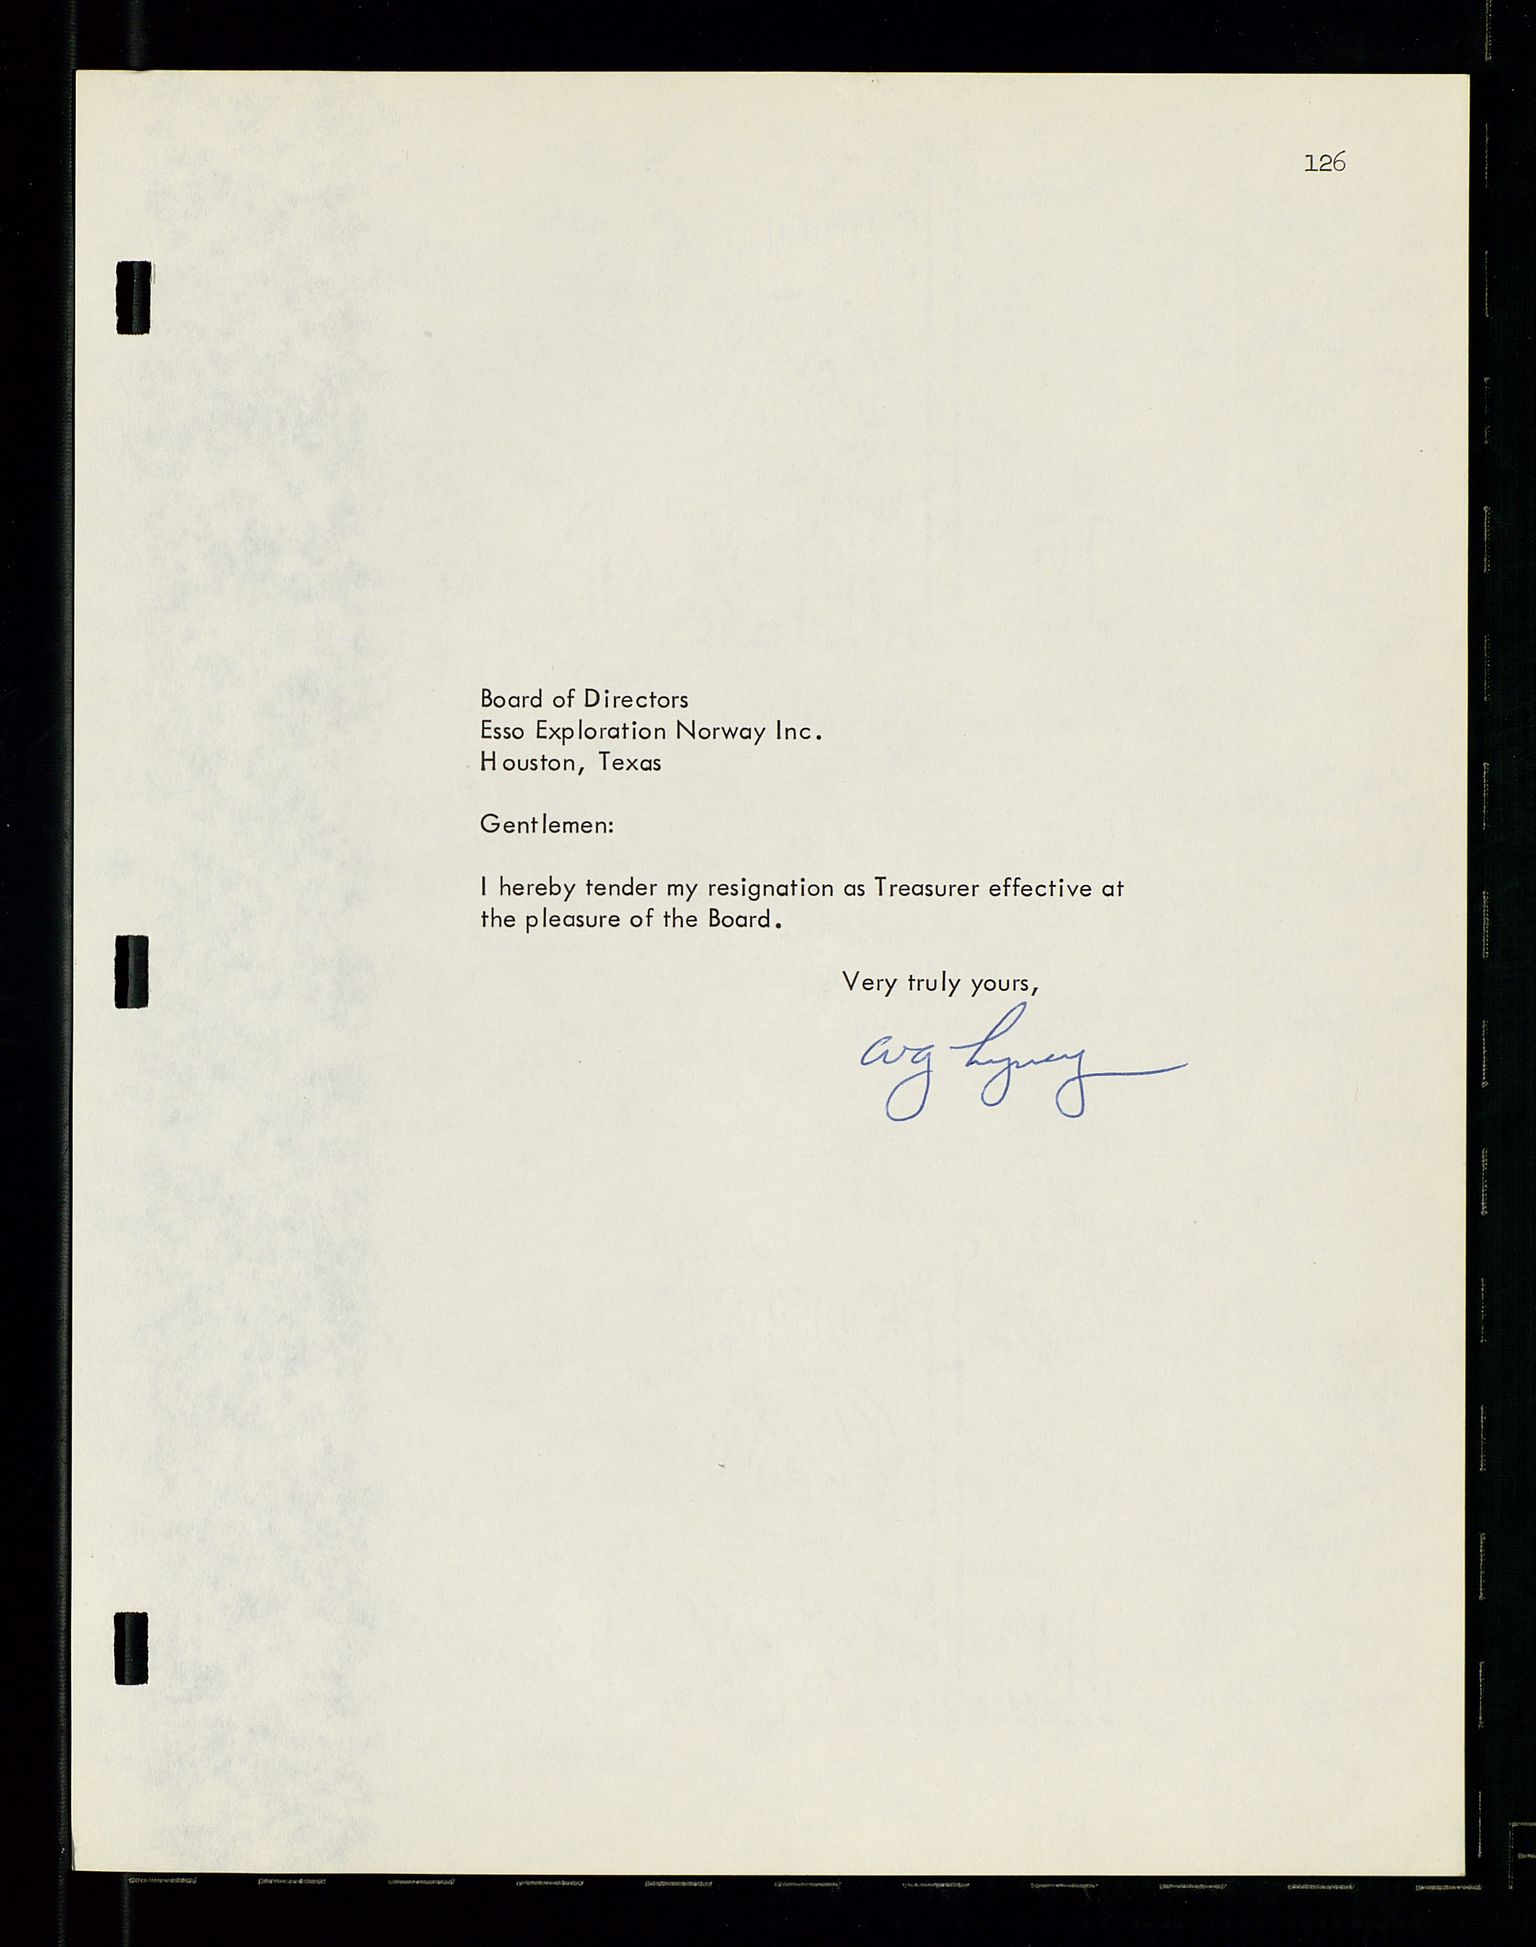 Pa 1512 - Esso Exploration and Production Norway Inc., SAST/A-101917/A/Aa/L0001/0001: Styredokumenter / Corporate records, By-Laws, Board meeting minutes, Incorporations, 1965-1975, s. 126